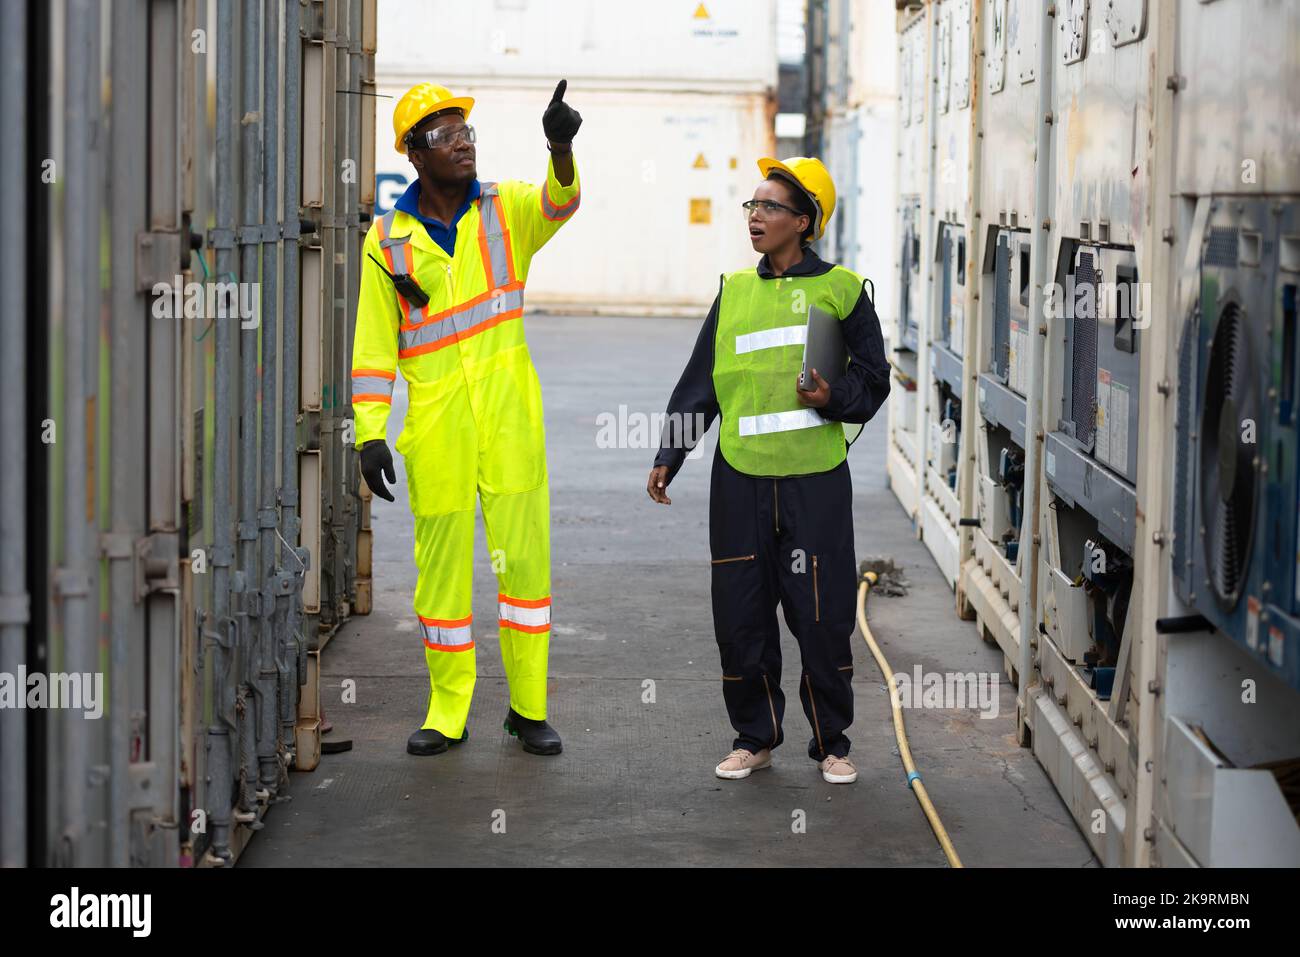 Young worker people working job at a warehouse,  Industrial Engineers, Safety Supervisors and Foremen in Hard Hats and Safety Vests Walking in Shippin Stock Photo